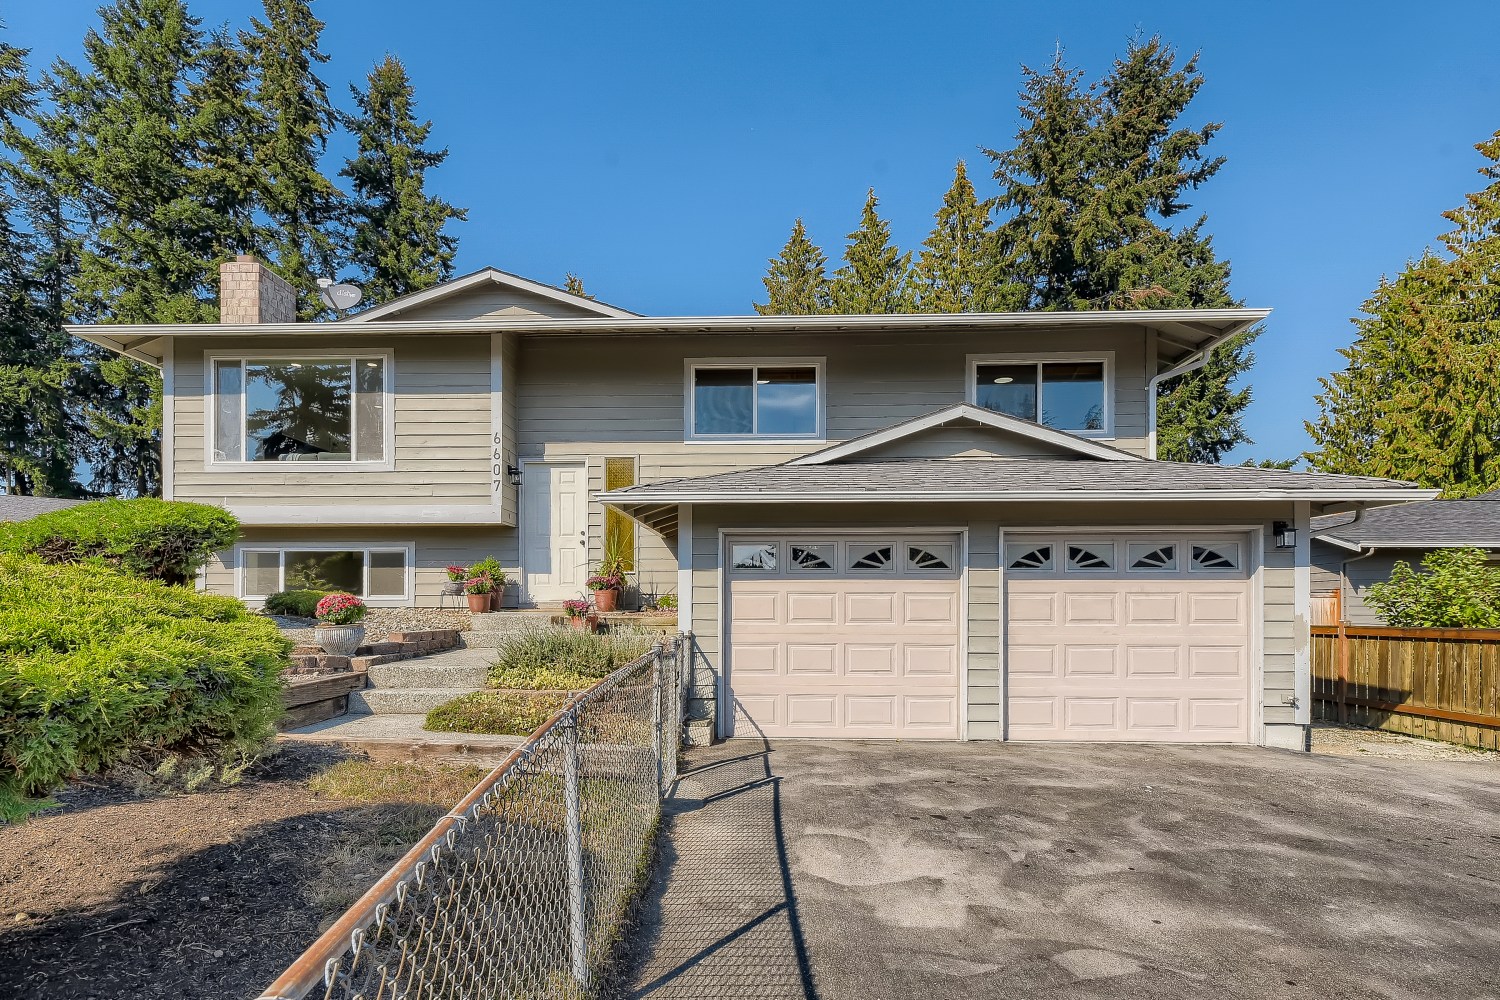 A split-level home for sale in Lynnwood